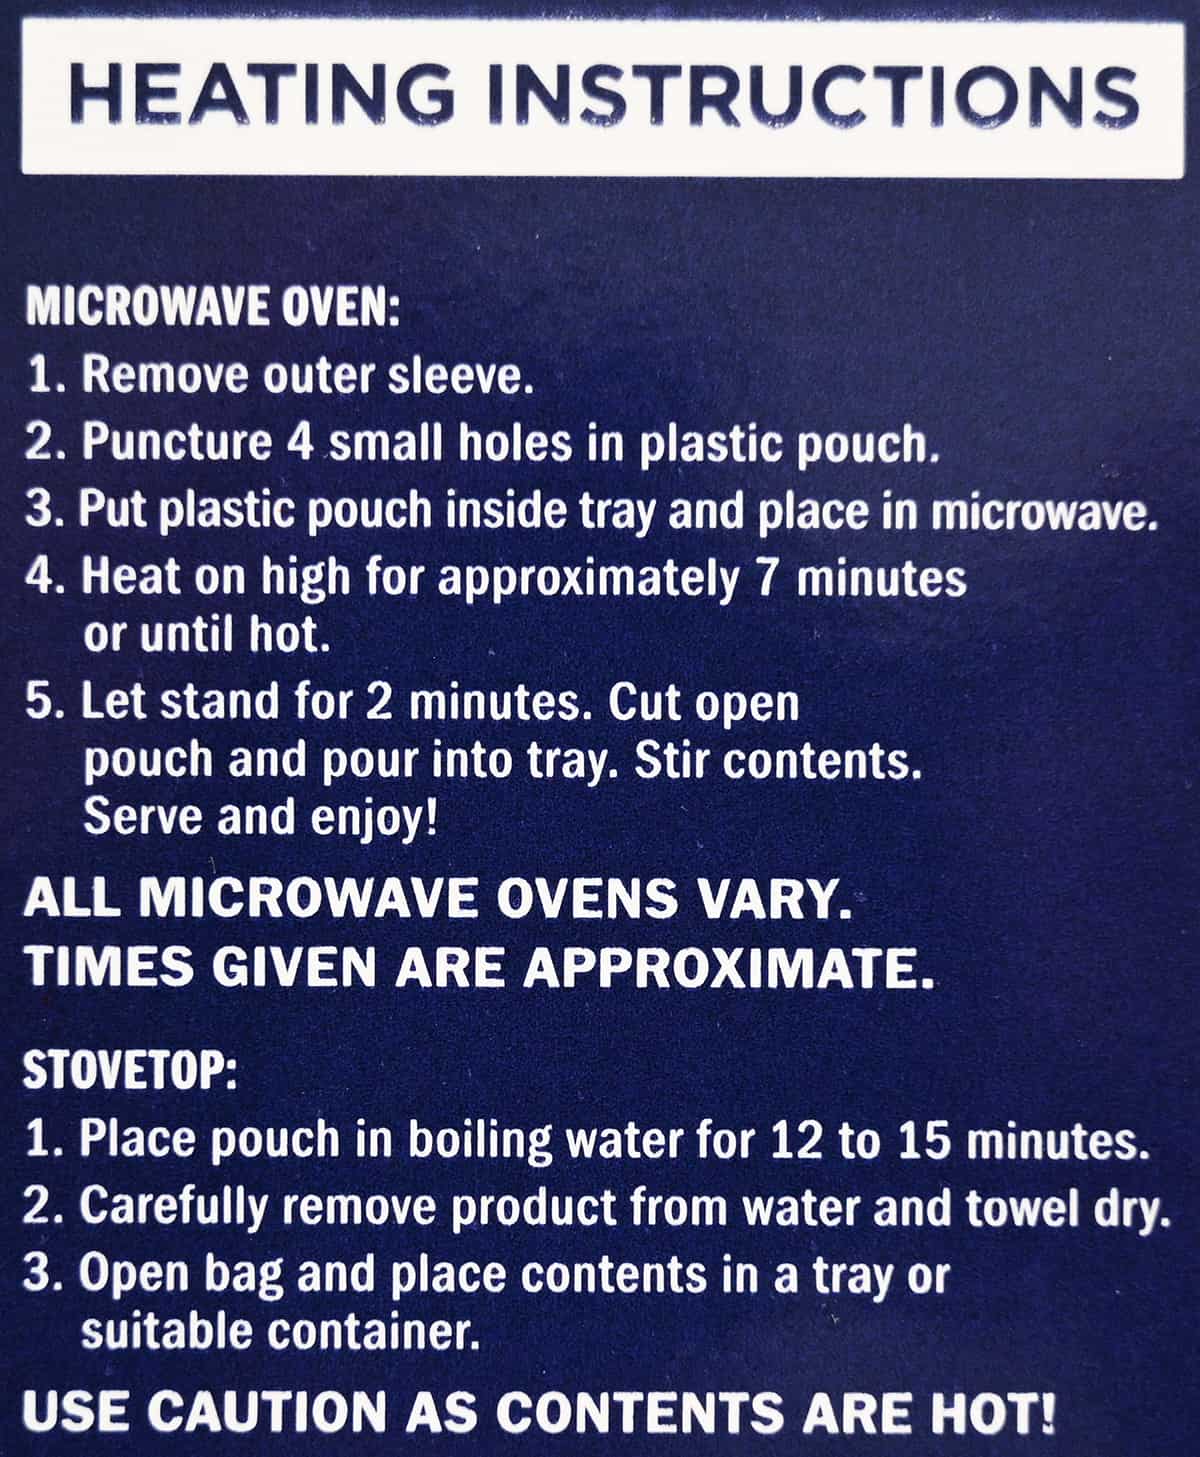 Image of the heating instructions for the pulled pork from the back of the package.